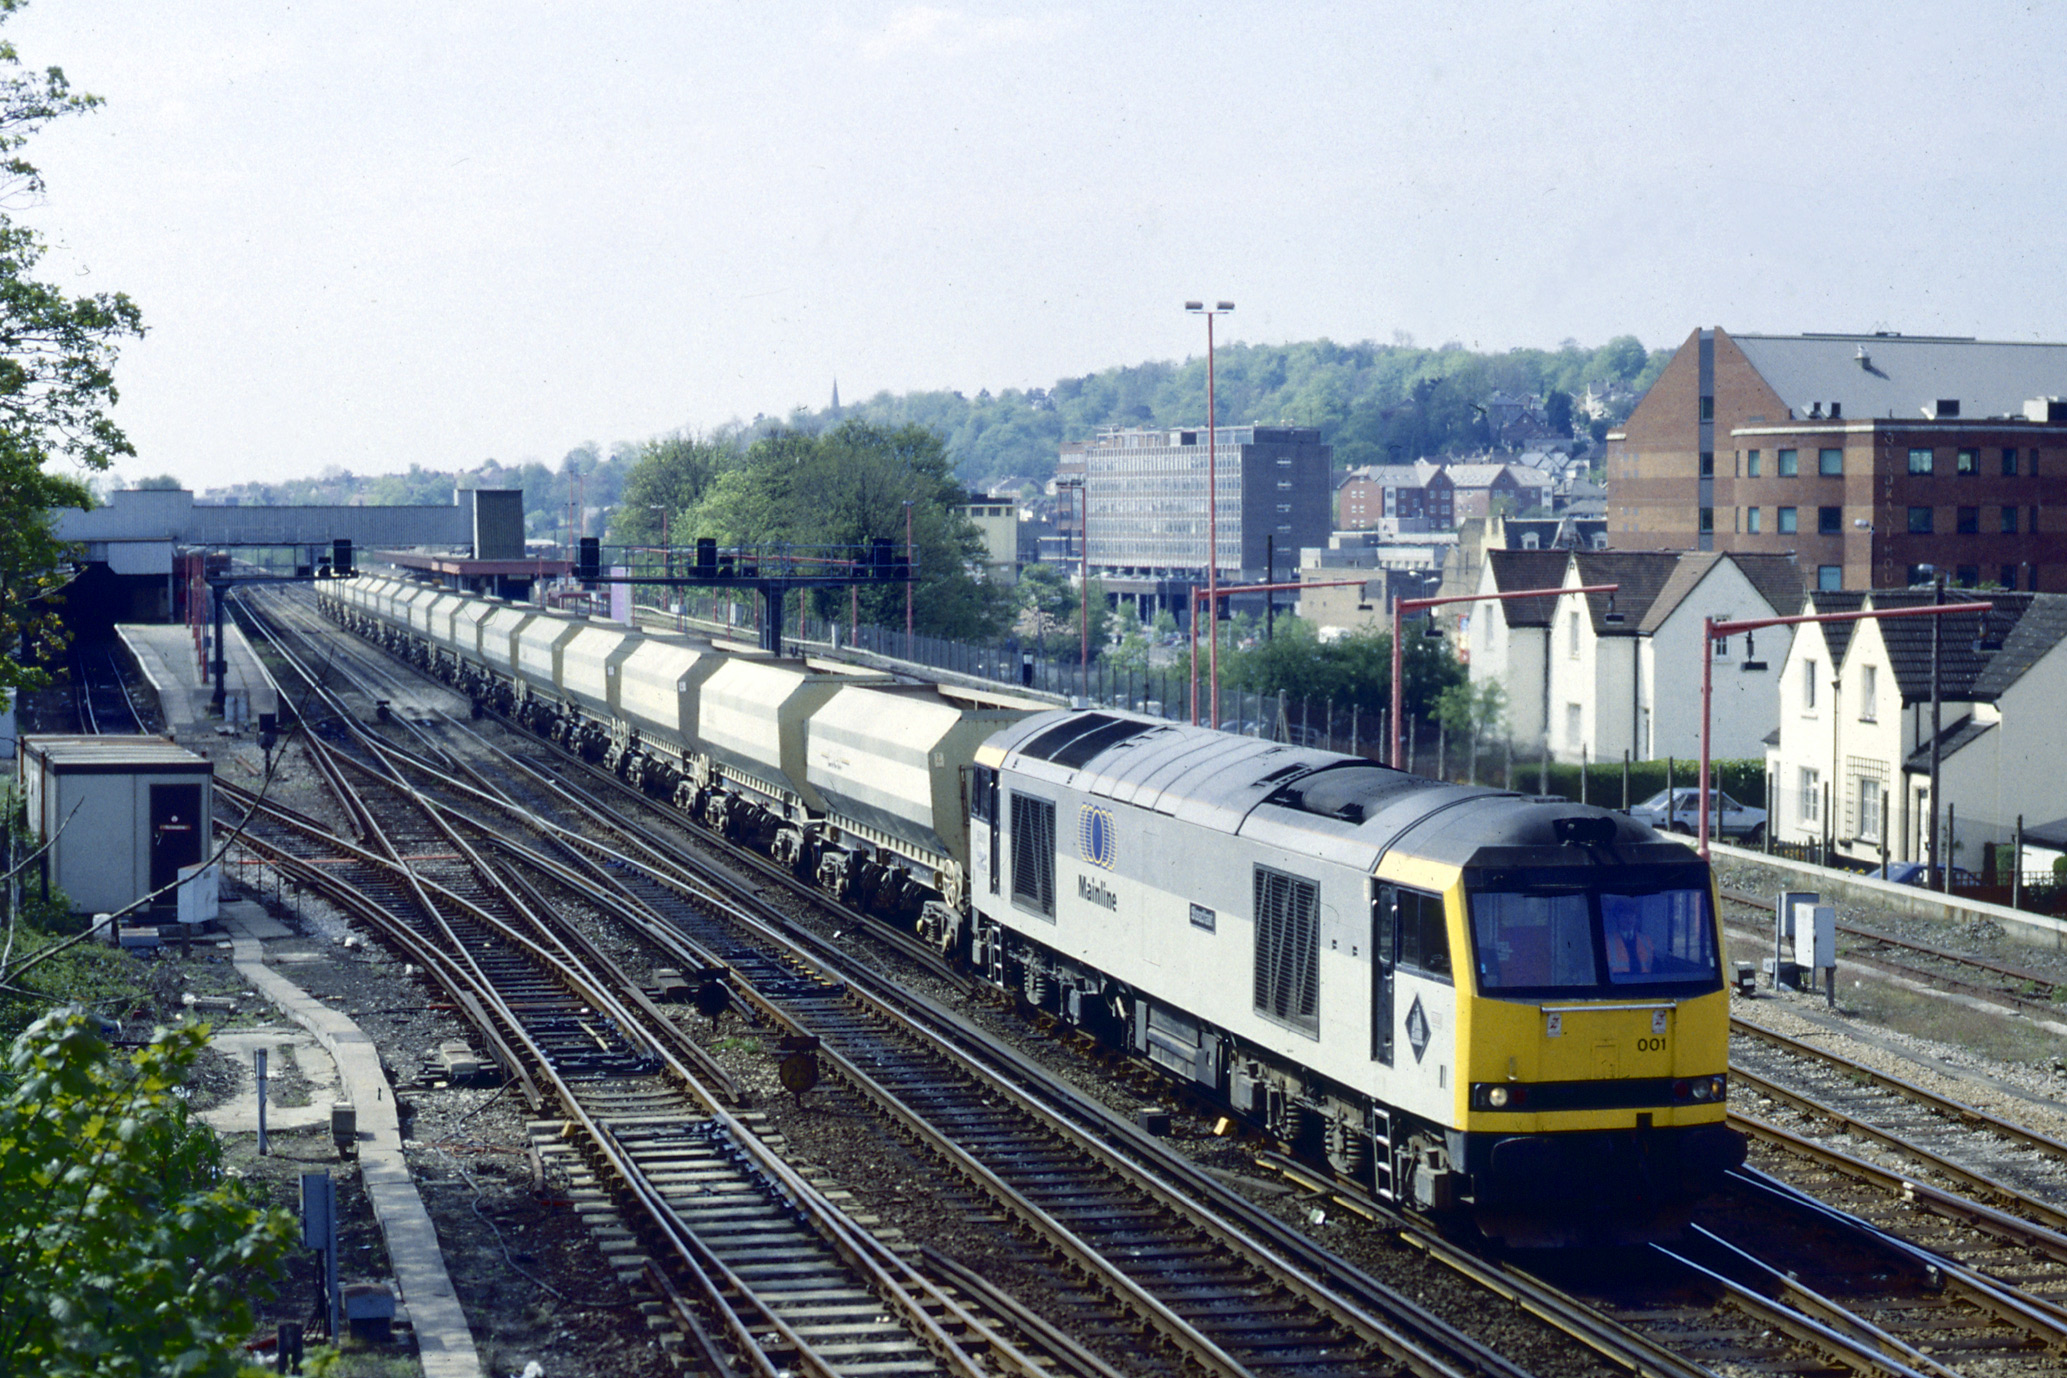 60001 Steadfast passing Redhill station with an up freight of empty Brett stone hopper bogies on 14th May 1996. Michael Mensing